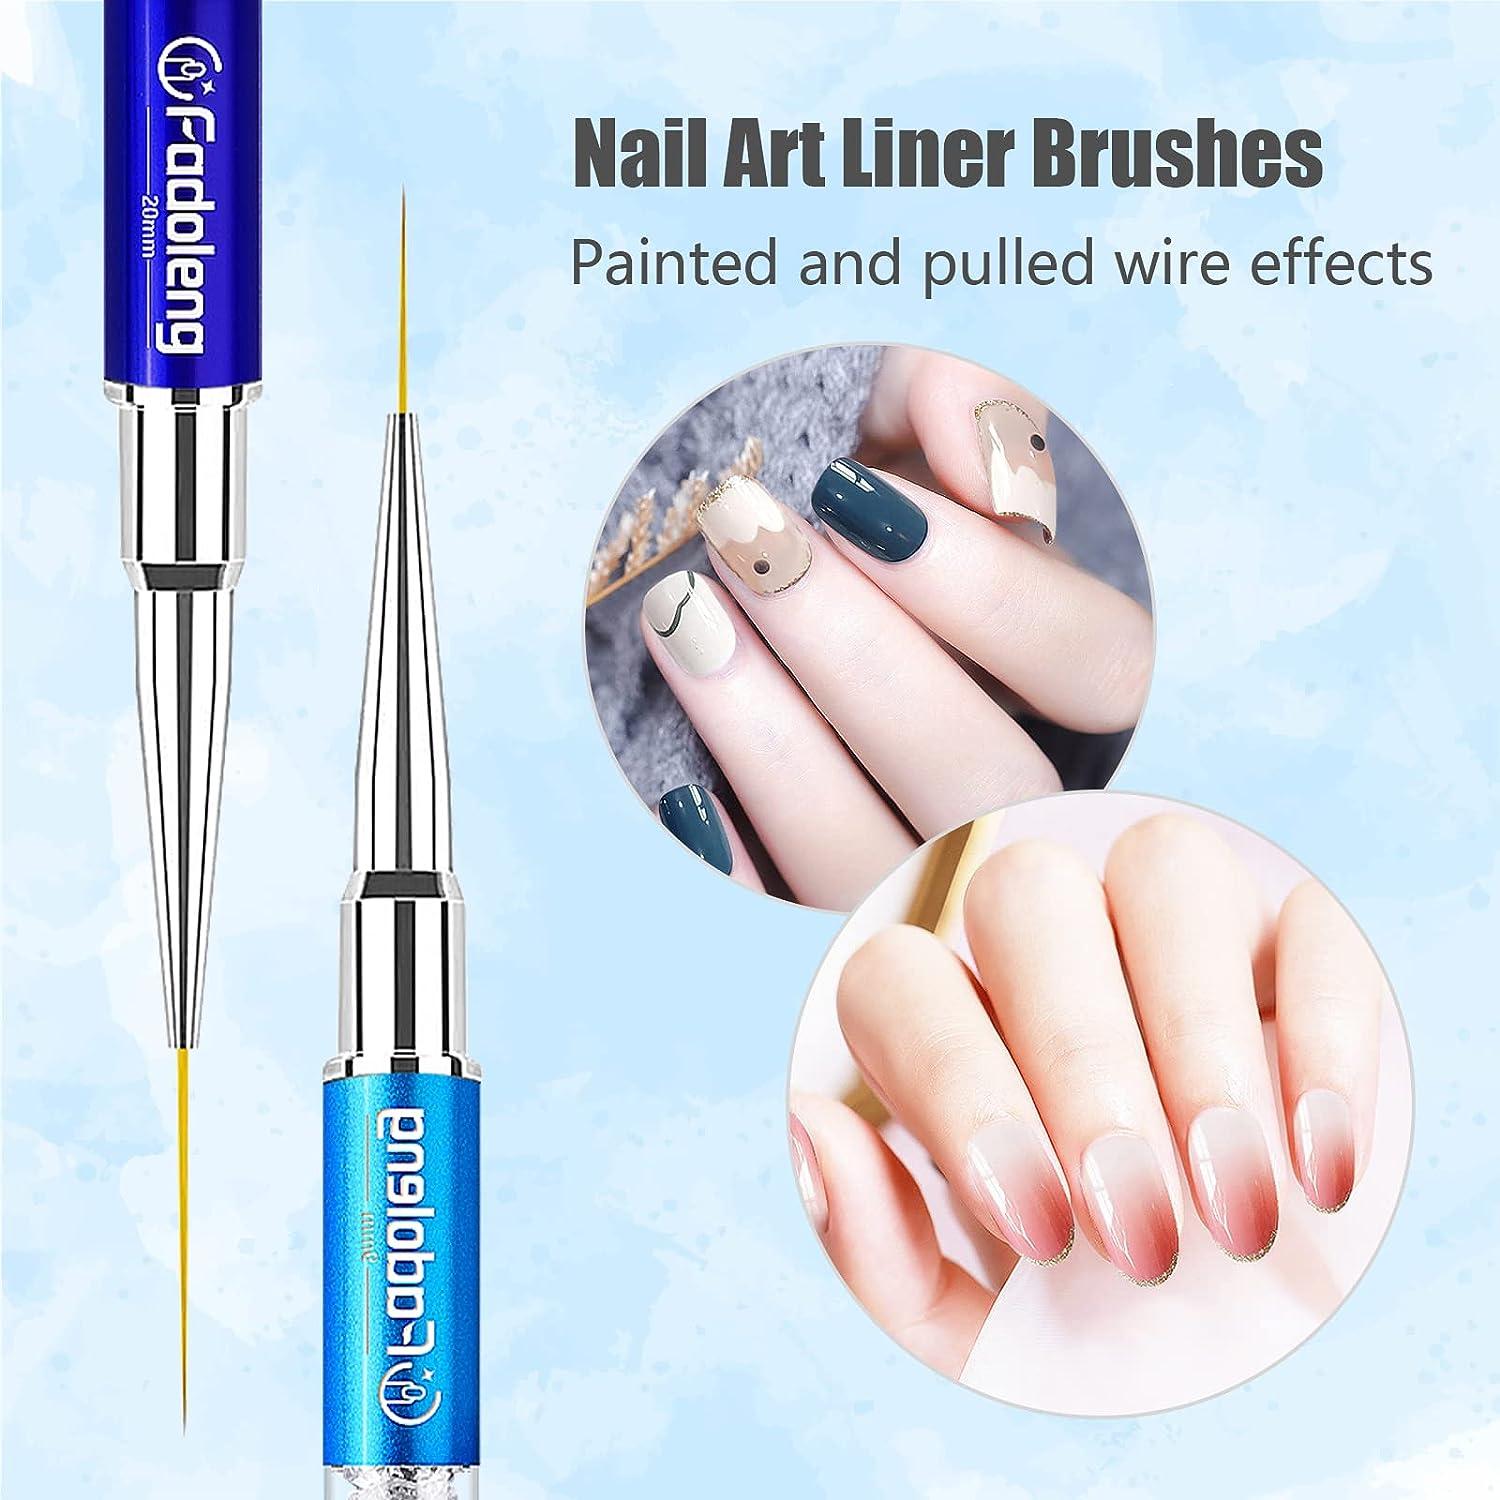 Nail Art Brushes, 7Pcs Nail Design Brushes for Salon at Home DIY Manicure  with Nail Liner Brush and Double-ended Fine Nail Art Pen (7/9/11/15/20mm)  Colorful